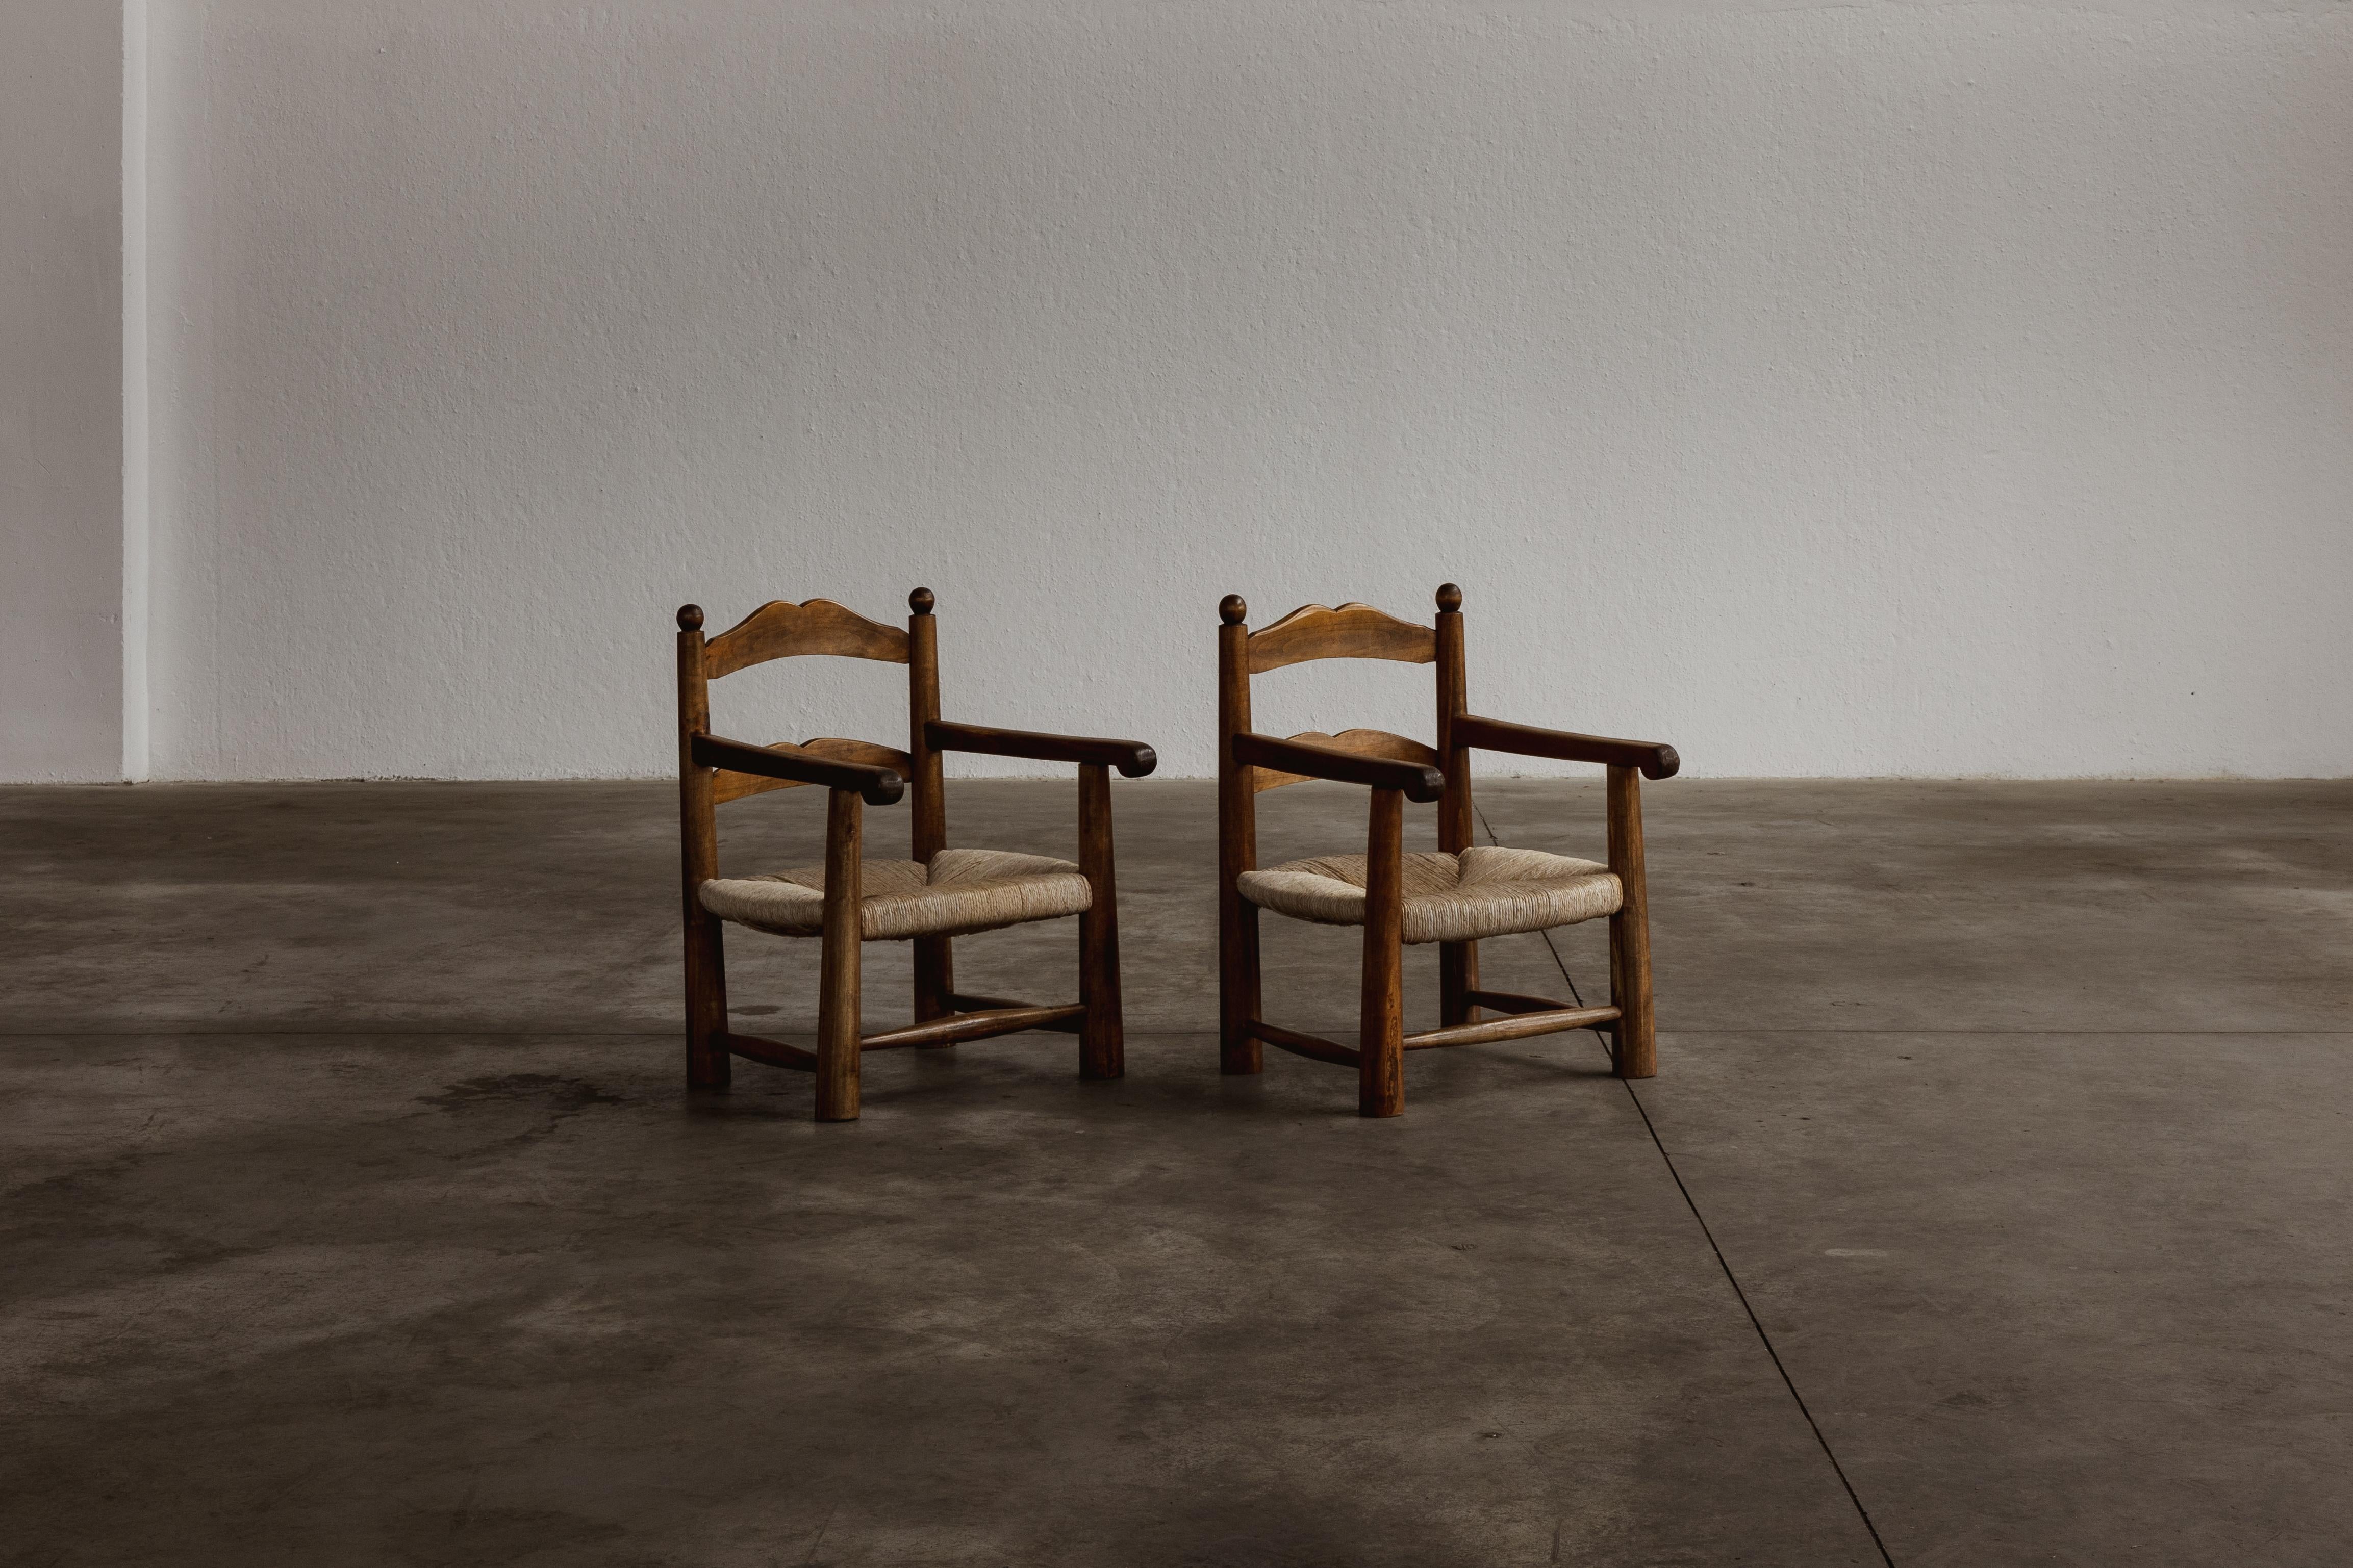 Charles Dudouyt easy chairs, straw and wood, France, 1940s, set of two.

Recalling the turned chair model, Charles Dudouyt created these carved chairs as 'fireside' chairs, hence the low seats. Using playful geometries and construction, he crafted